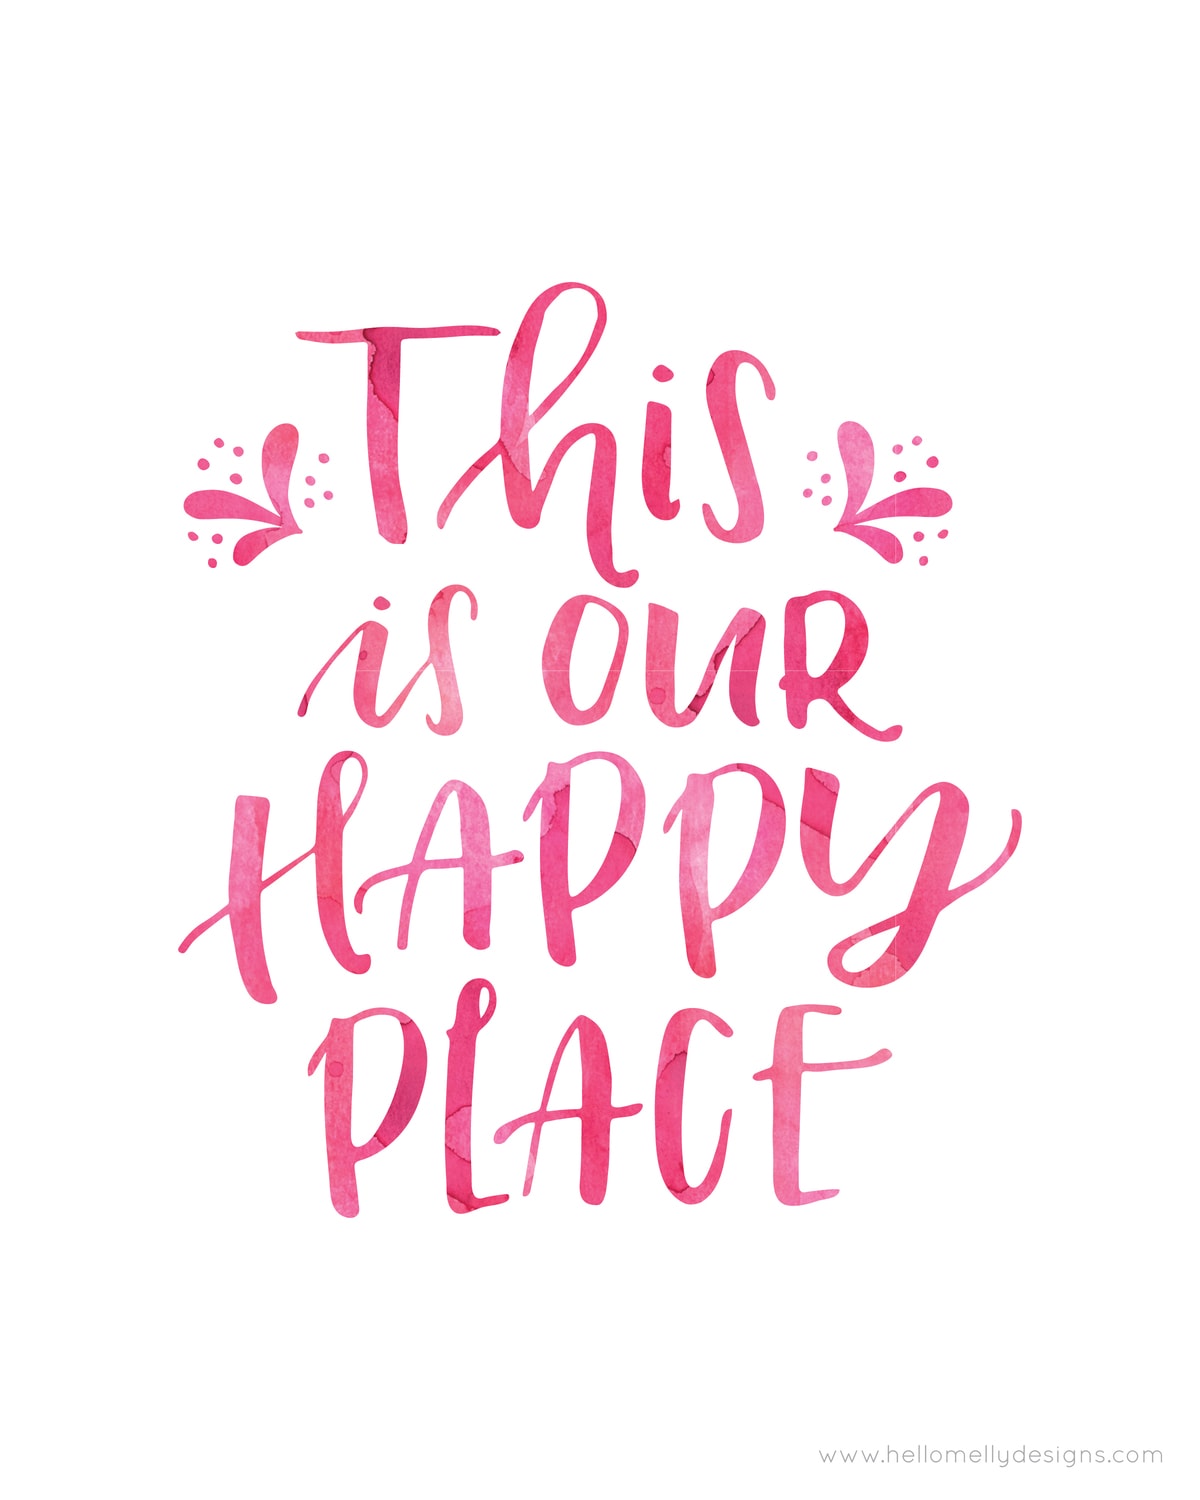 This is our Happy Place Free Printables - available to download in 3 colors!